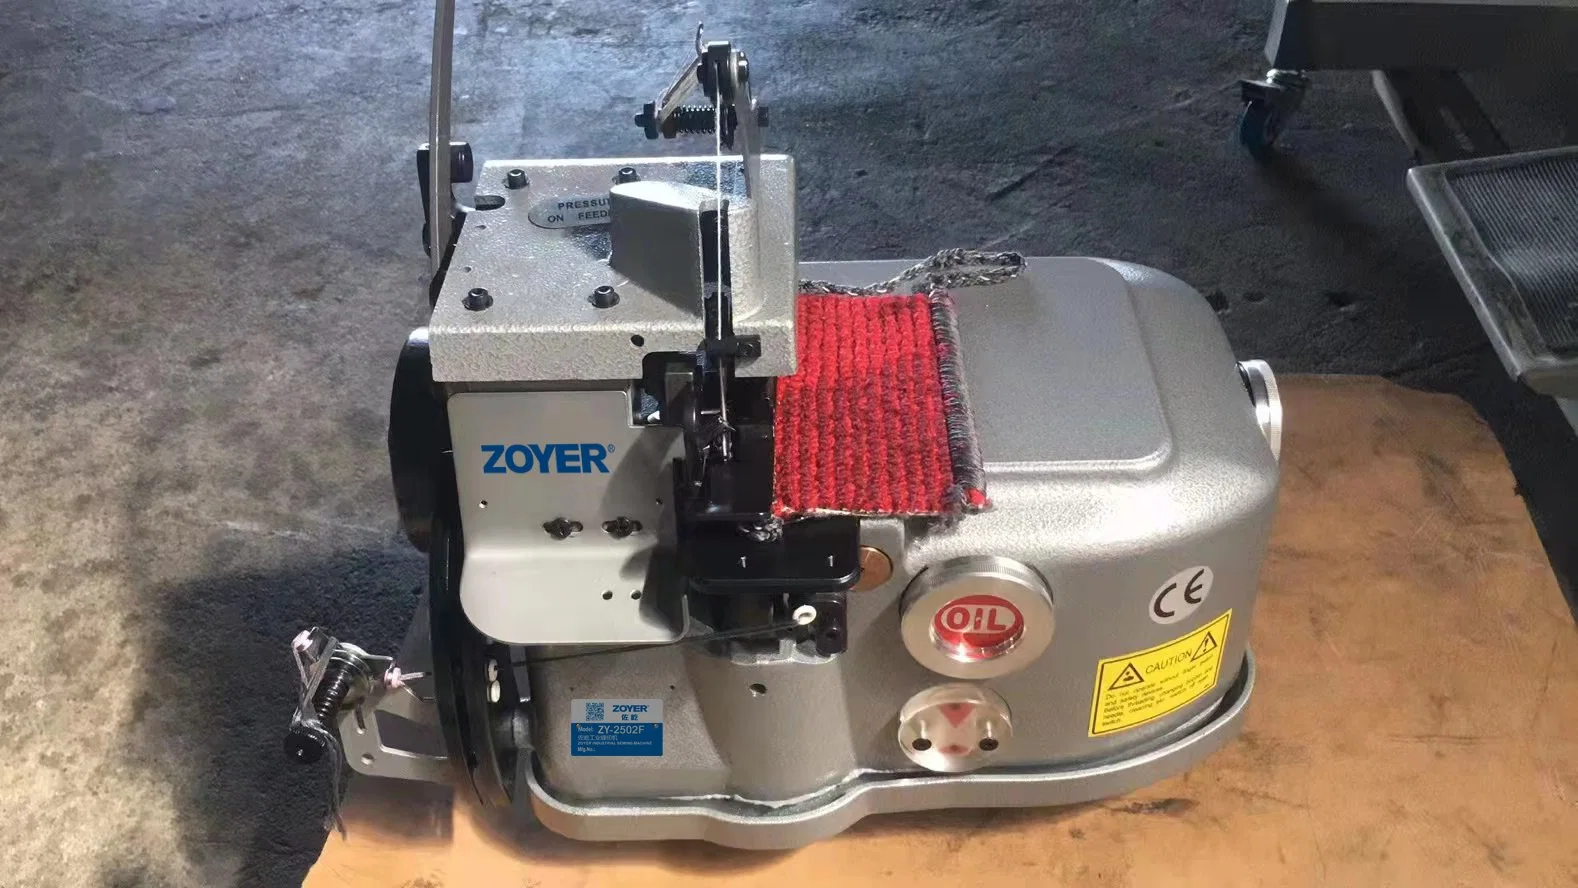 Zy2502K Zoyer Carpet Merrow Double Thread Overlock Overdging Sewing Machine with Knife for Blankets